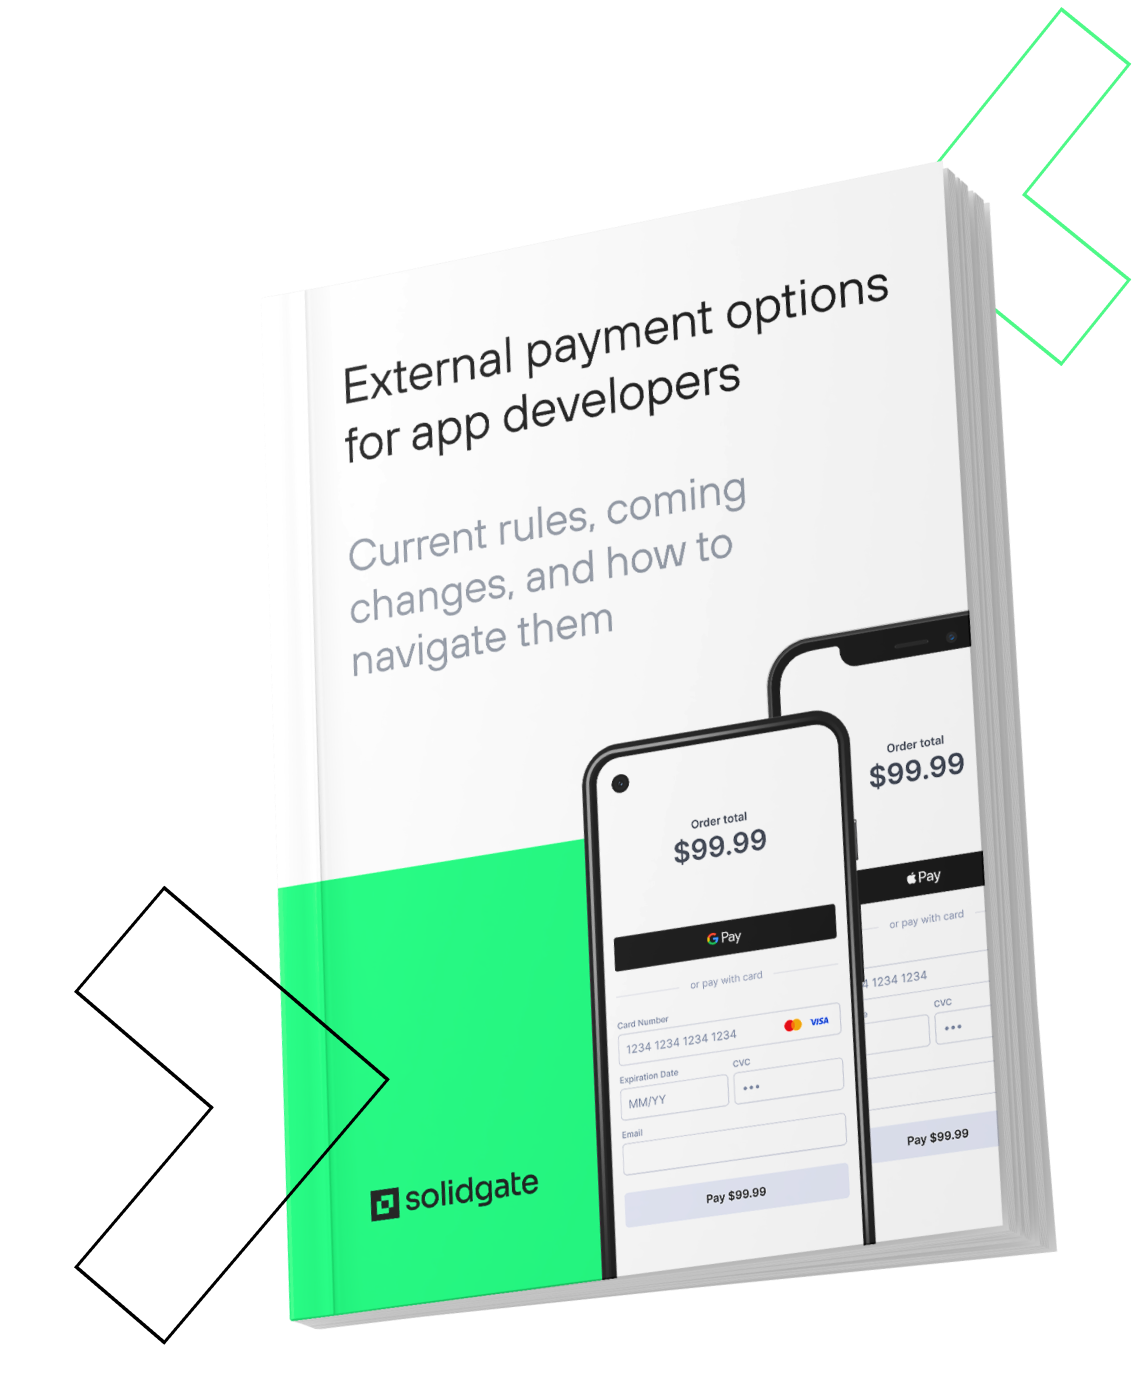 External payment options for apps